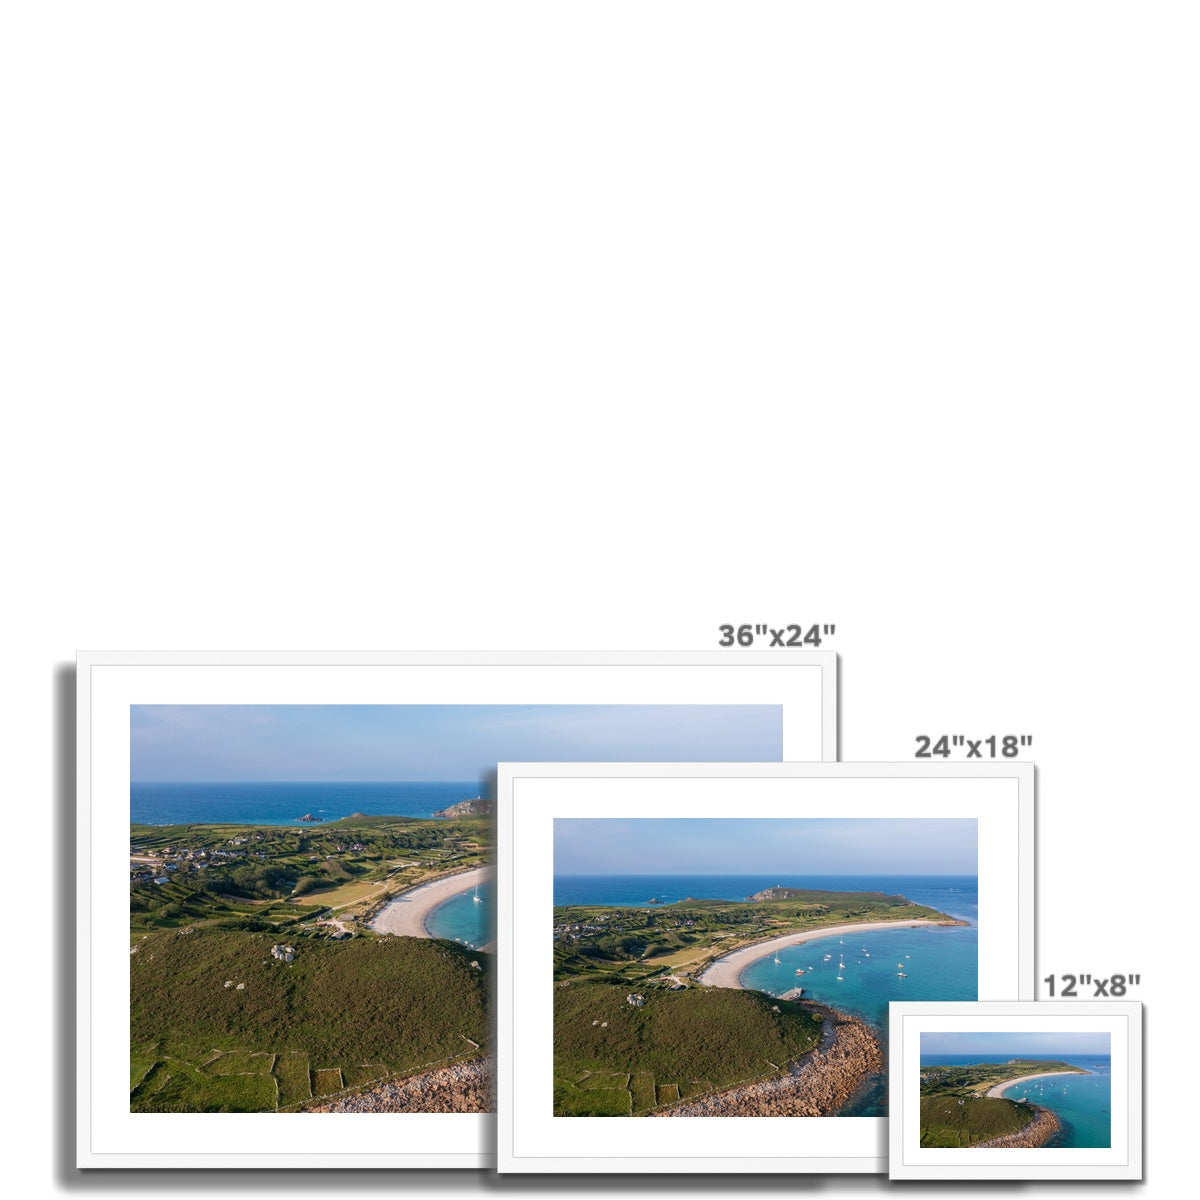 cruthers hill st martins wooden frame sizes